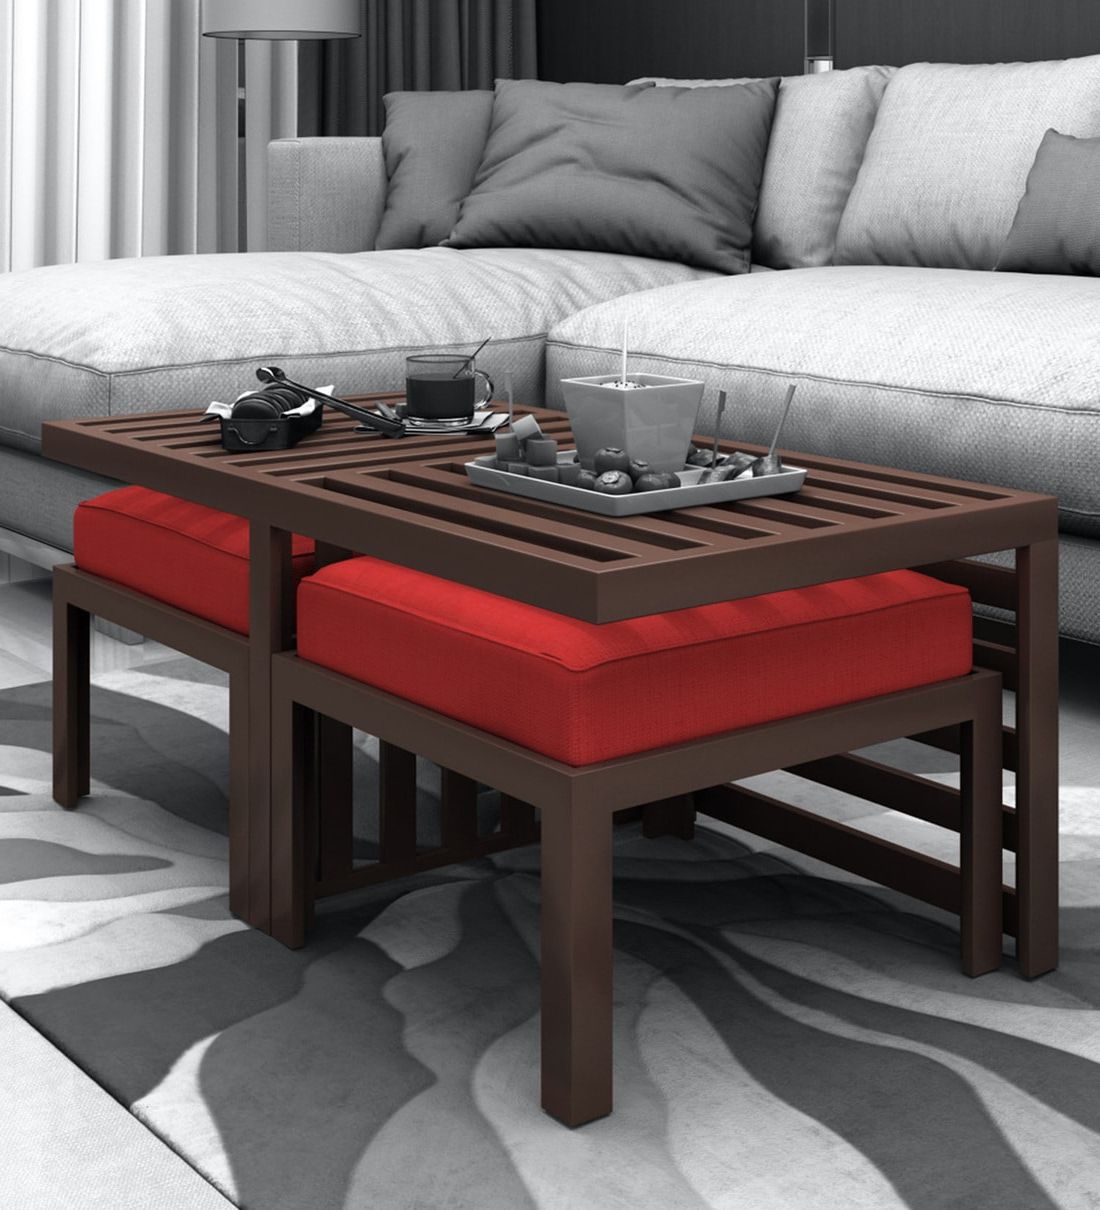 Buy Trendy Coffee Table With 2 Red Cushioned Stools In For Most Popular Pecan Brown Triangular Coffee Tables (View 16 of 20)